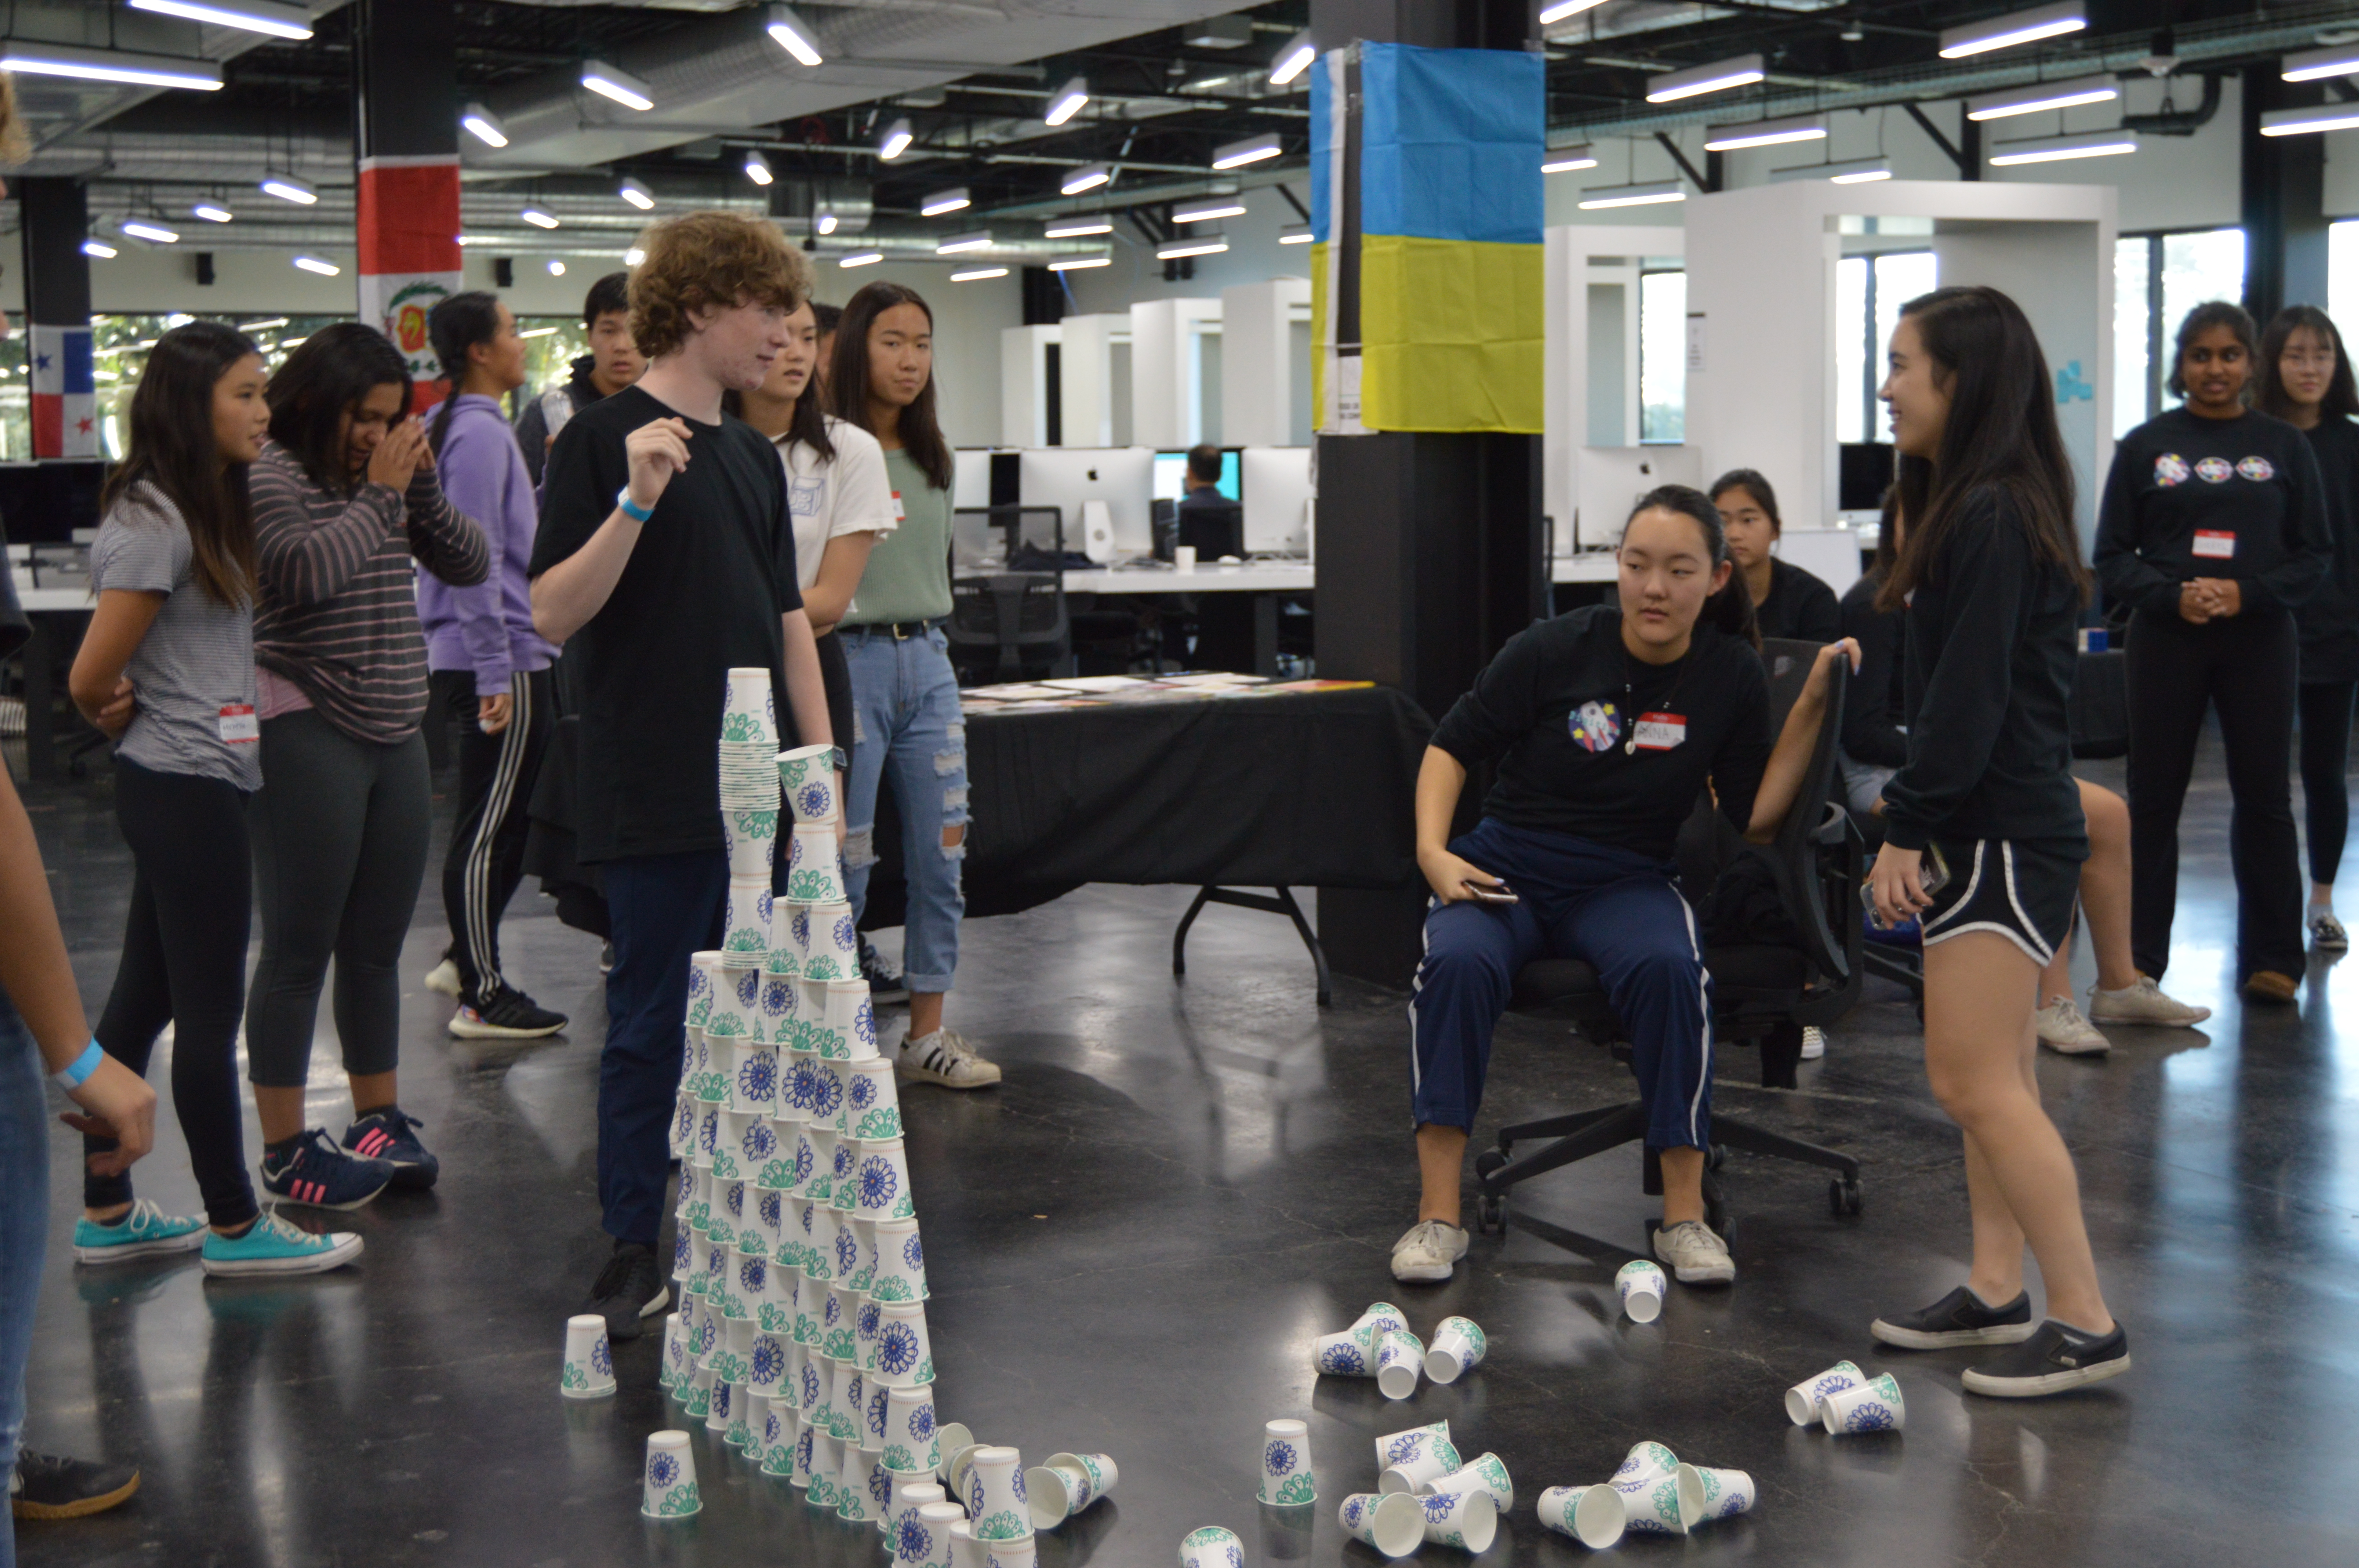 Students play a cup stacking game to bond at the hackathon.